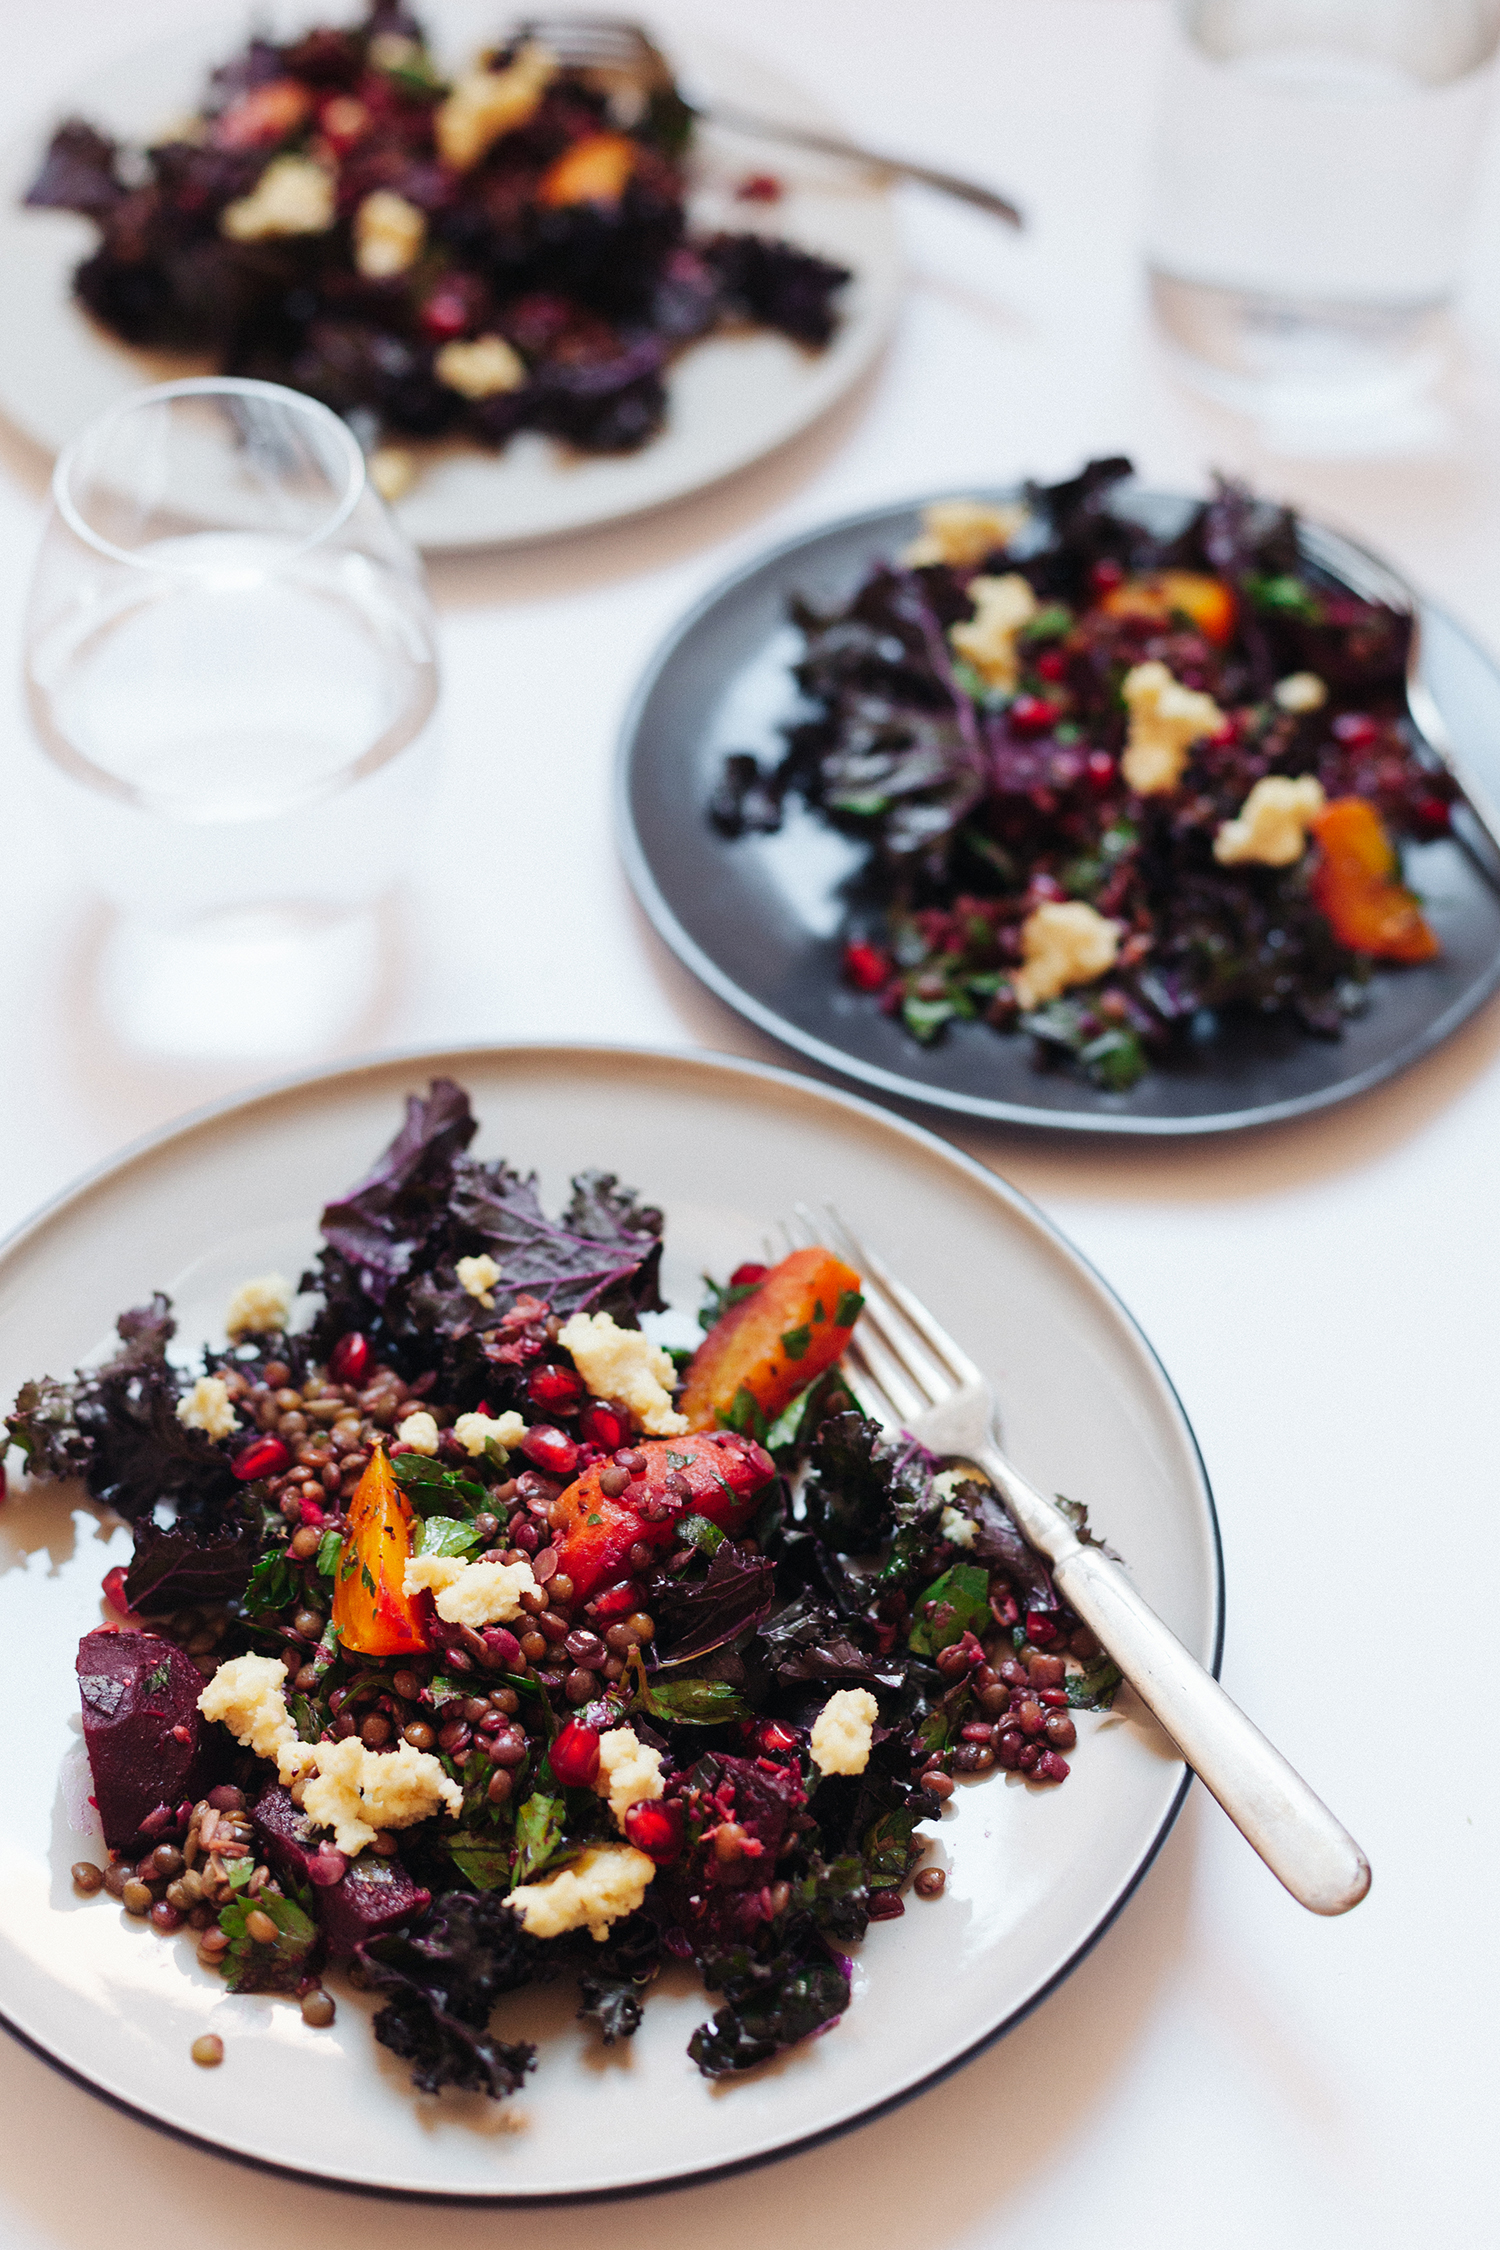 Kale Salad with Marinated Beets, Lentils and Almond Cheese | Golubka Kitchen